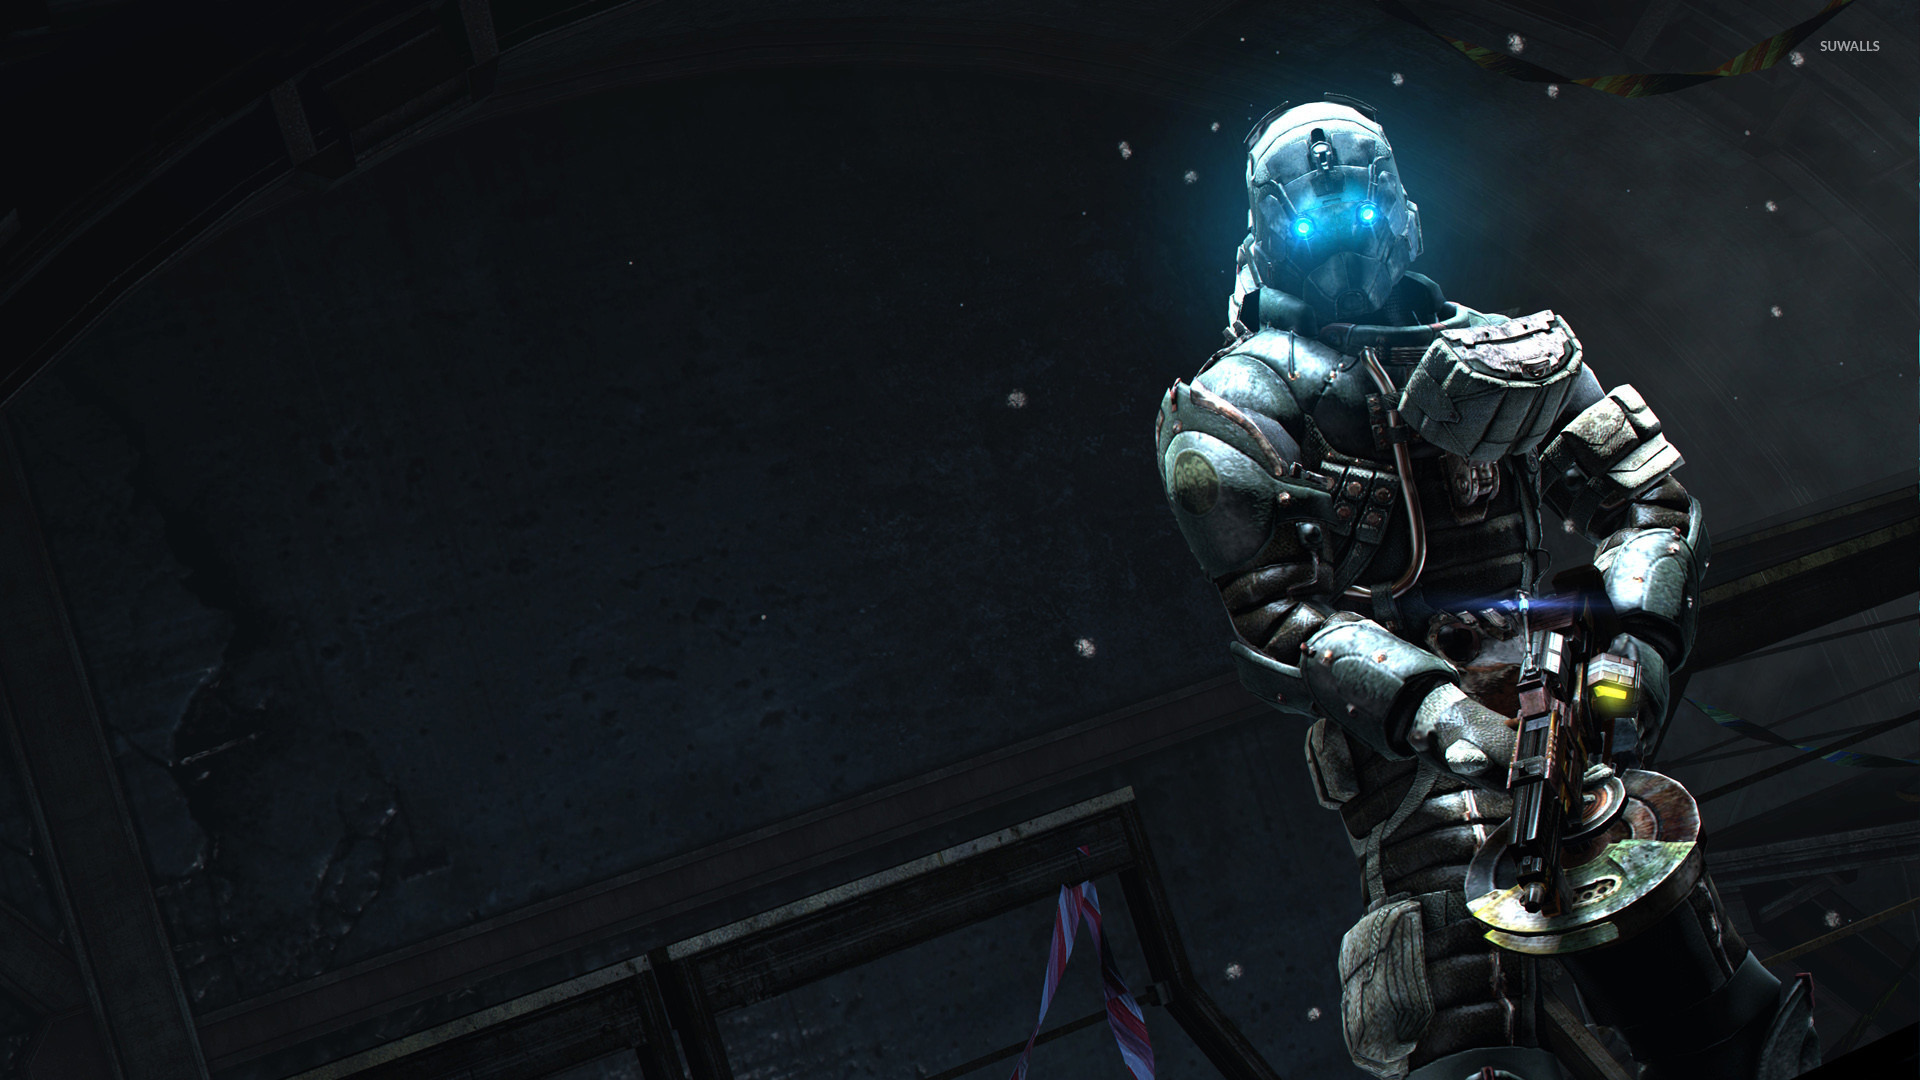 dead space 3 can